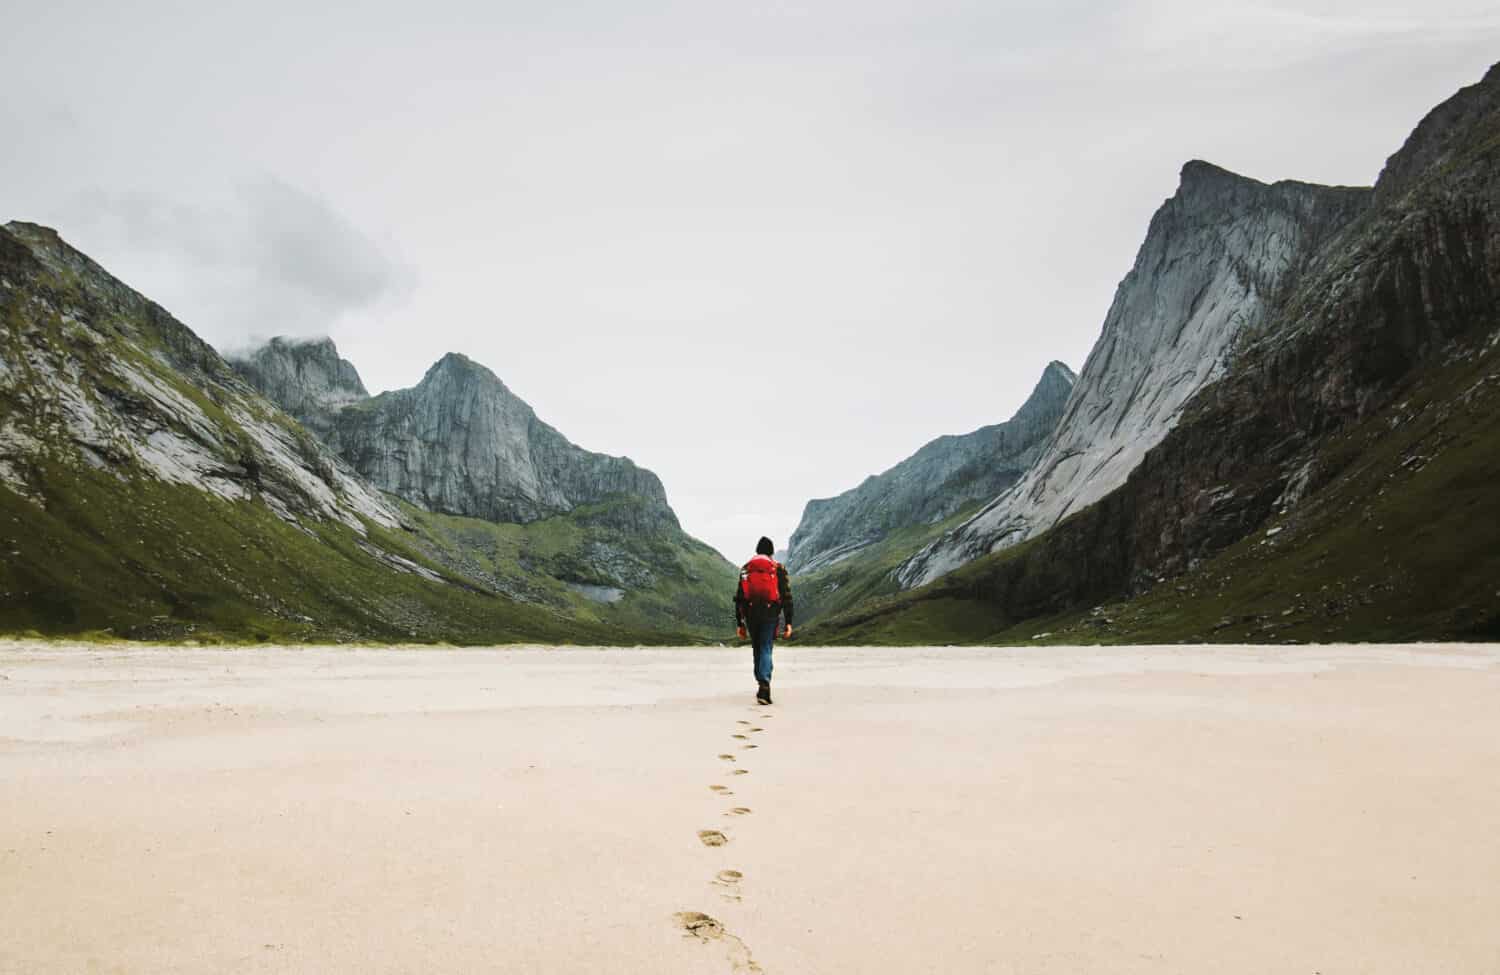 Man with backpack walking away alone at sandy beach in mountains Travel lifestyle concept adventure outdoor summer vacations in Norway wild nature 